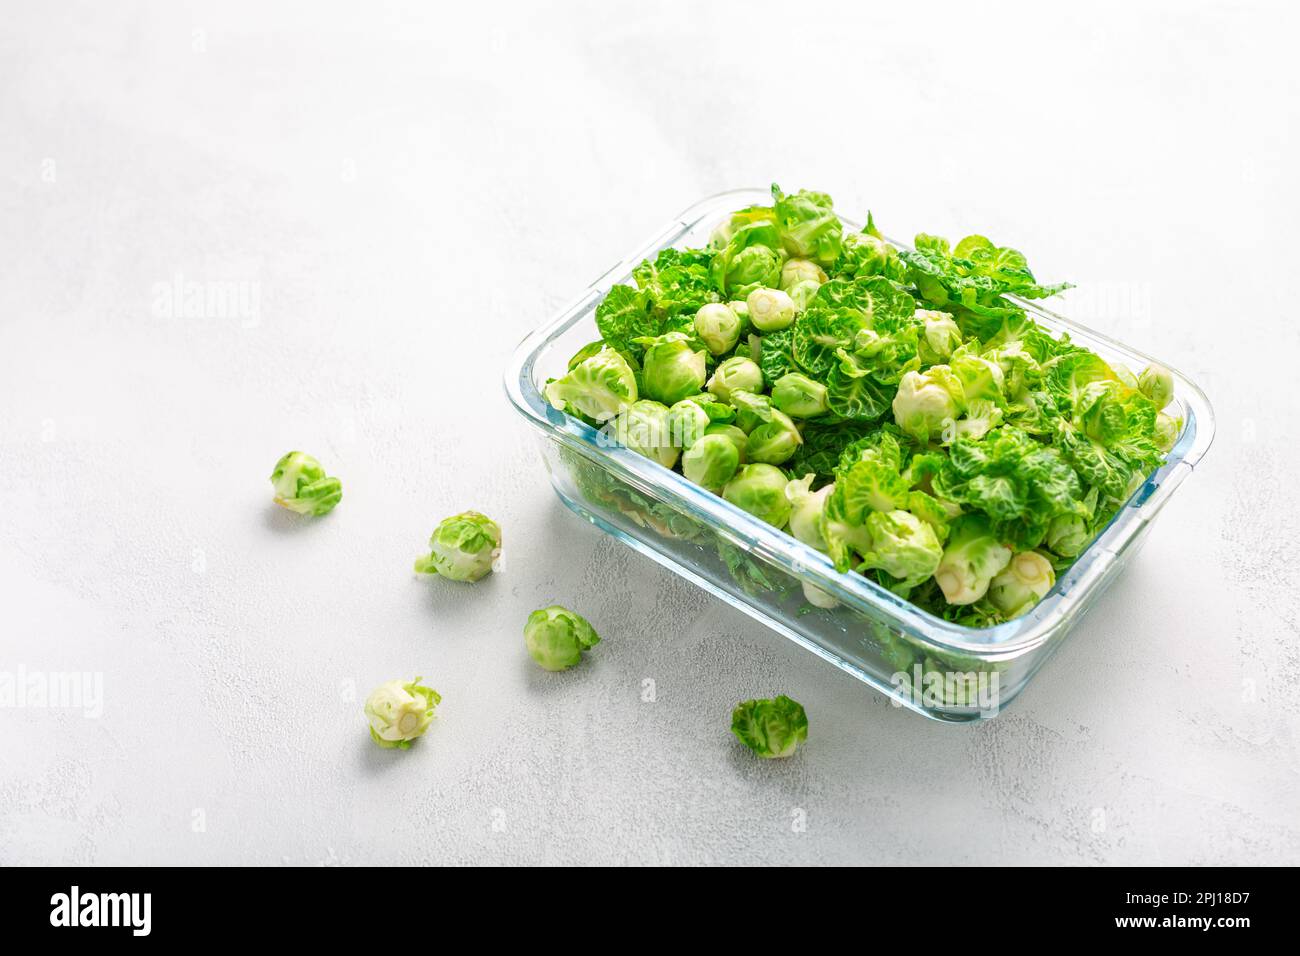 Fresh  organic green brussels sprouts and small winter cabbage vegetable in glass container, ready to freeze Stock Photo